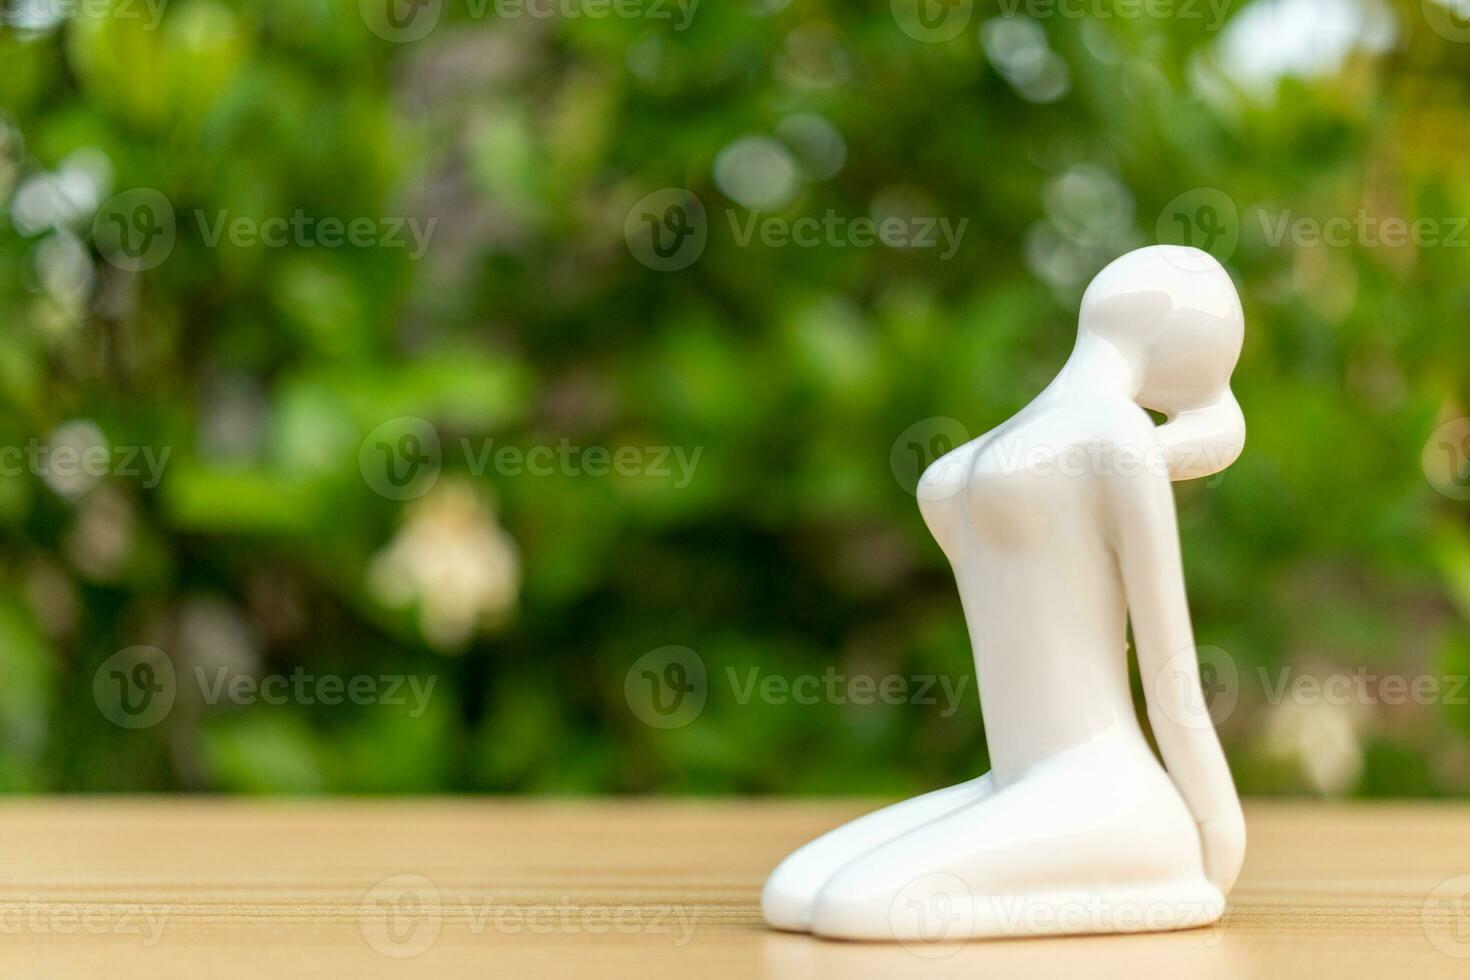 Ceramic Yoga Figurine of Woman doing yoga pose on wooden floor and green leaf  background photo